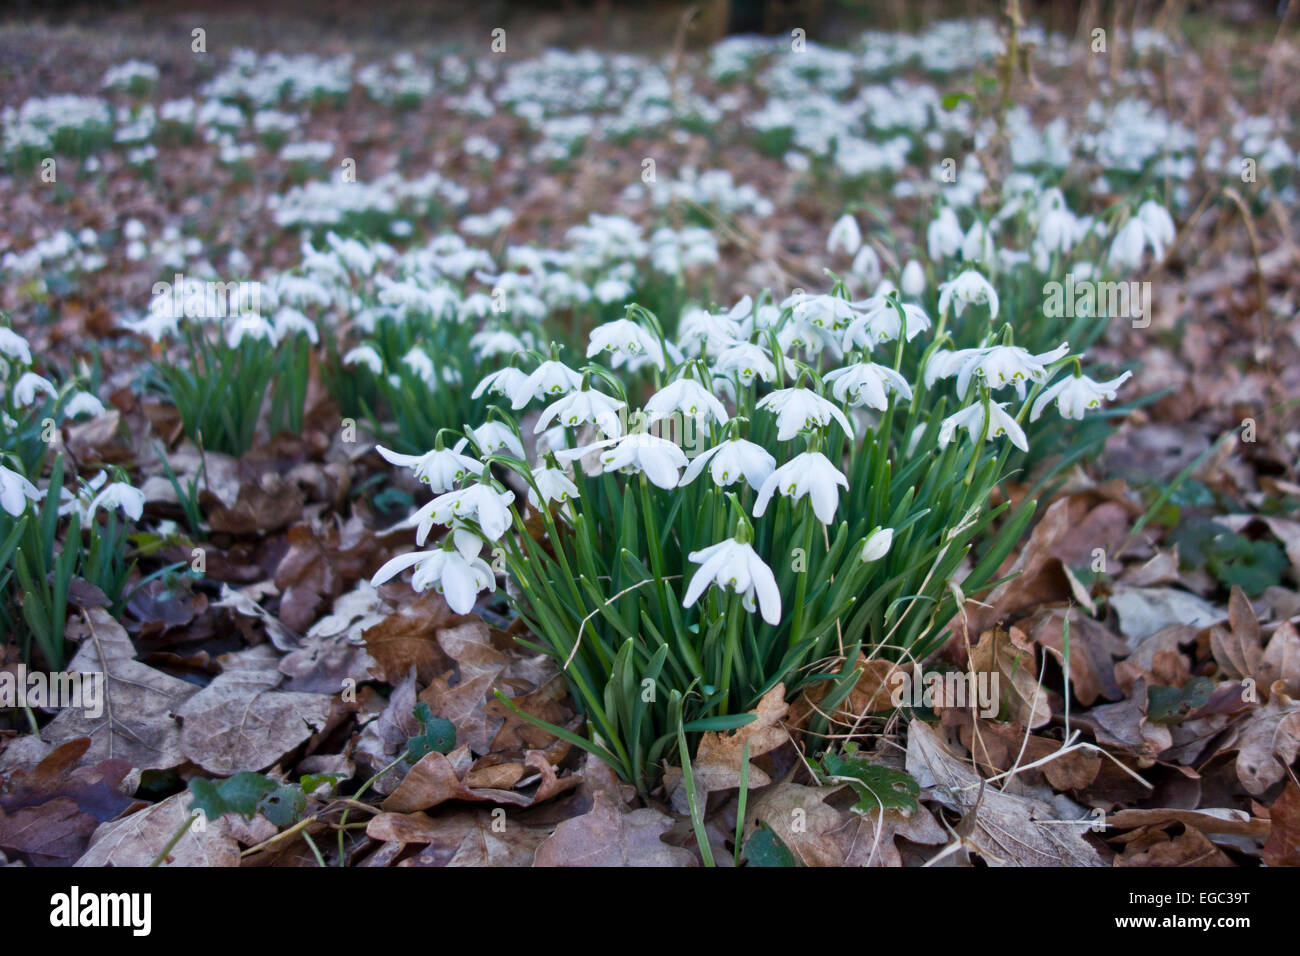 Snow drops Galanthus snowdrop in grass verge by road country lane Stock Photo